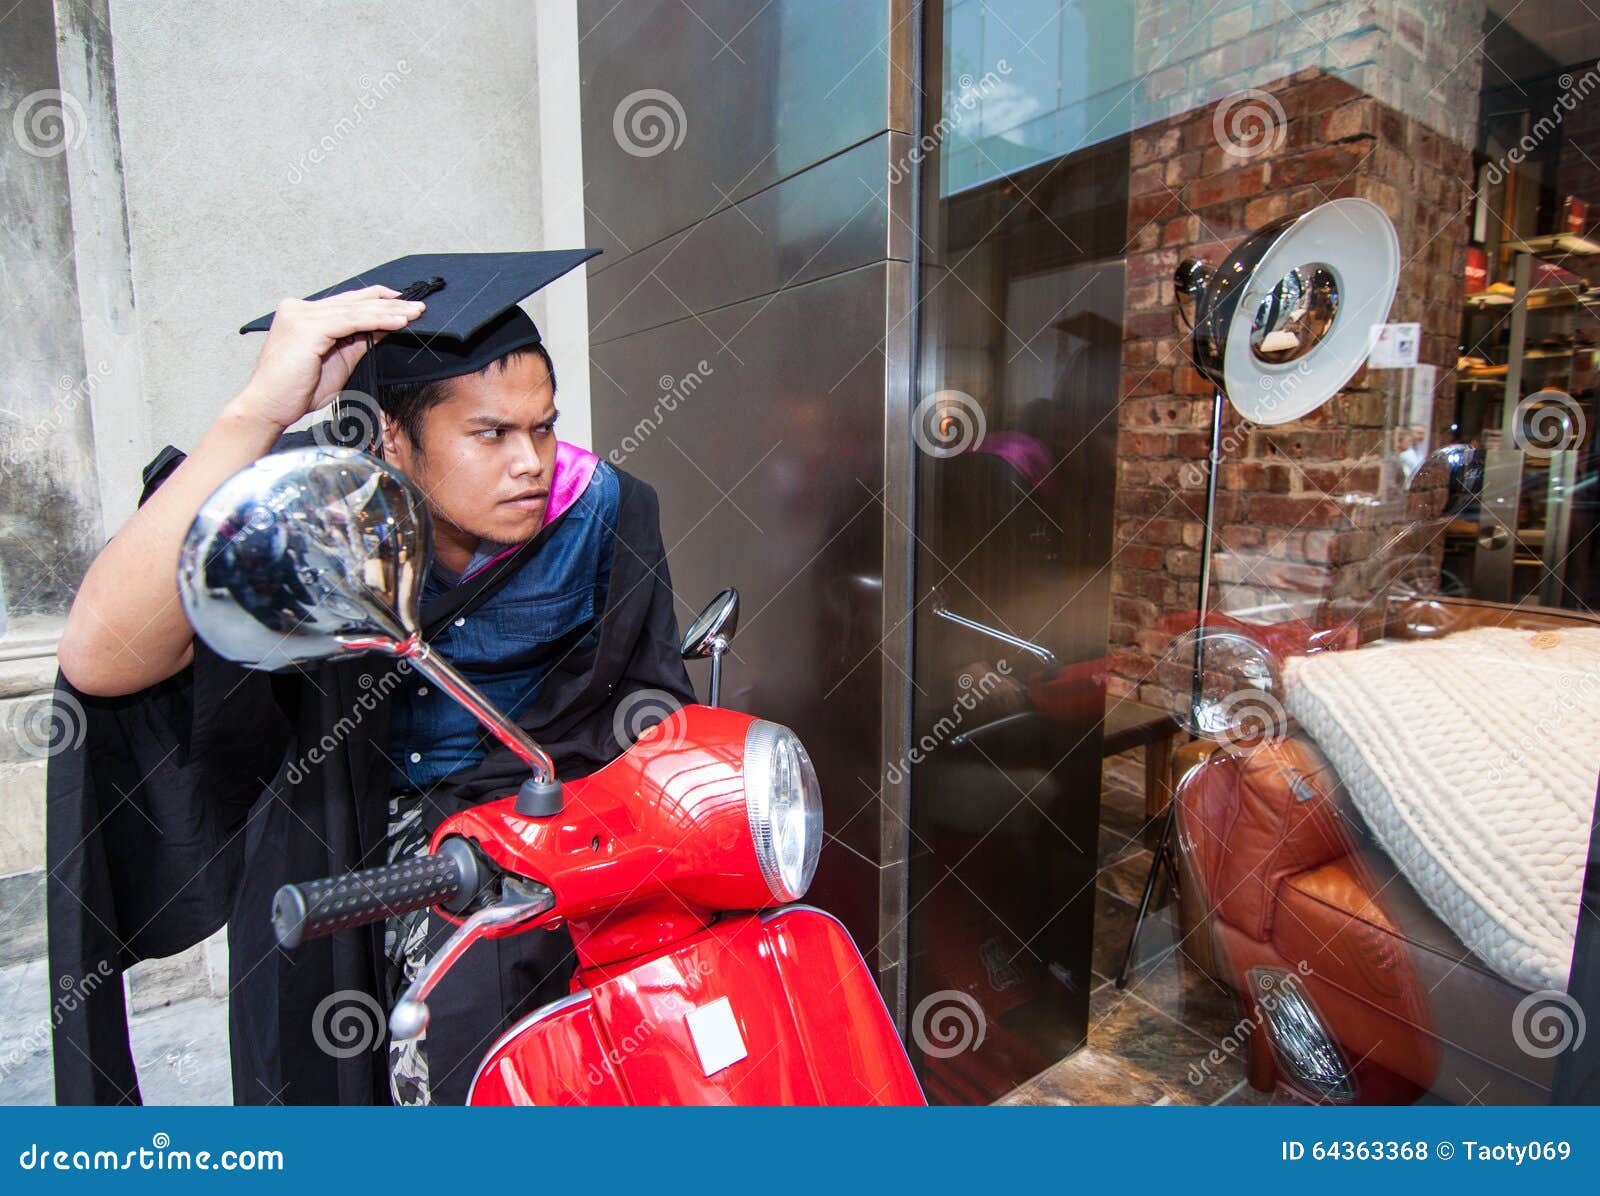 Man stock photo. Image of people, motorcycle, driver - 64363368